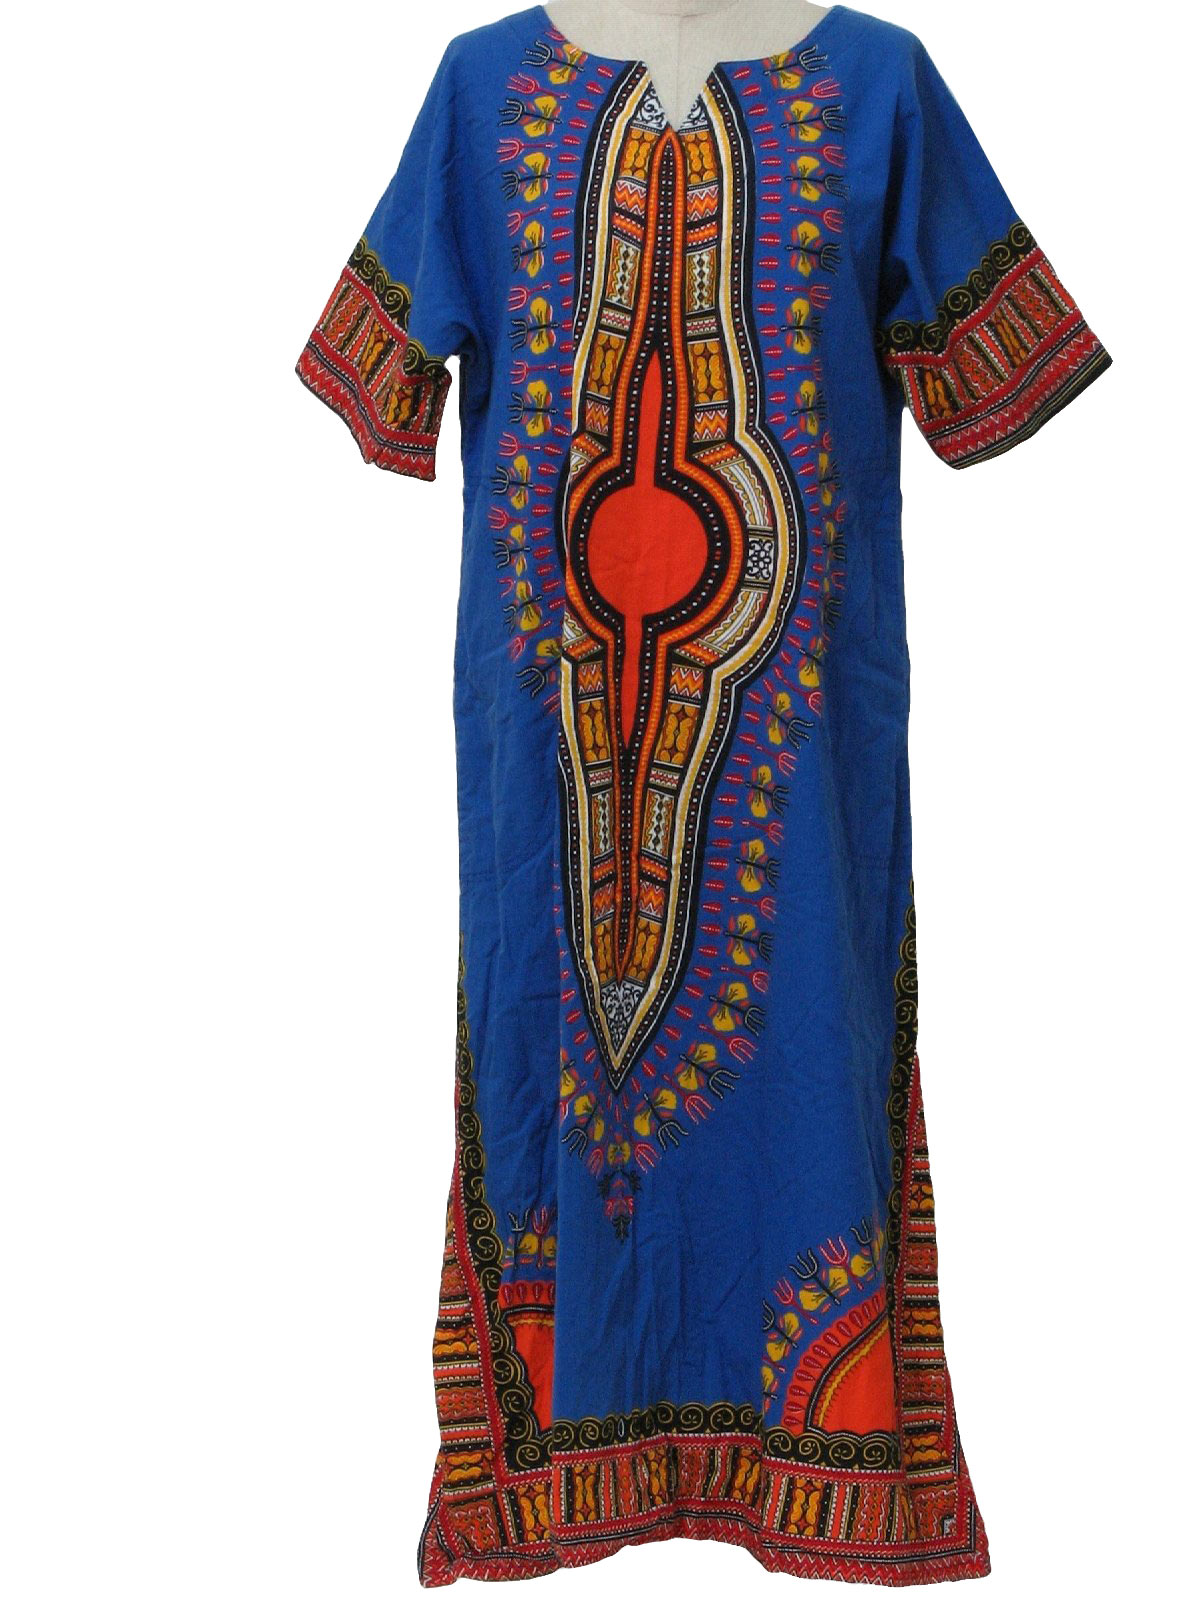 Jaime Ca 1970s Vintage Hippie Dress 70s Style Made In 90s Jaime Ca Womens Blue Red White 